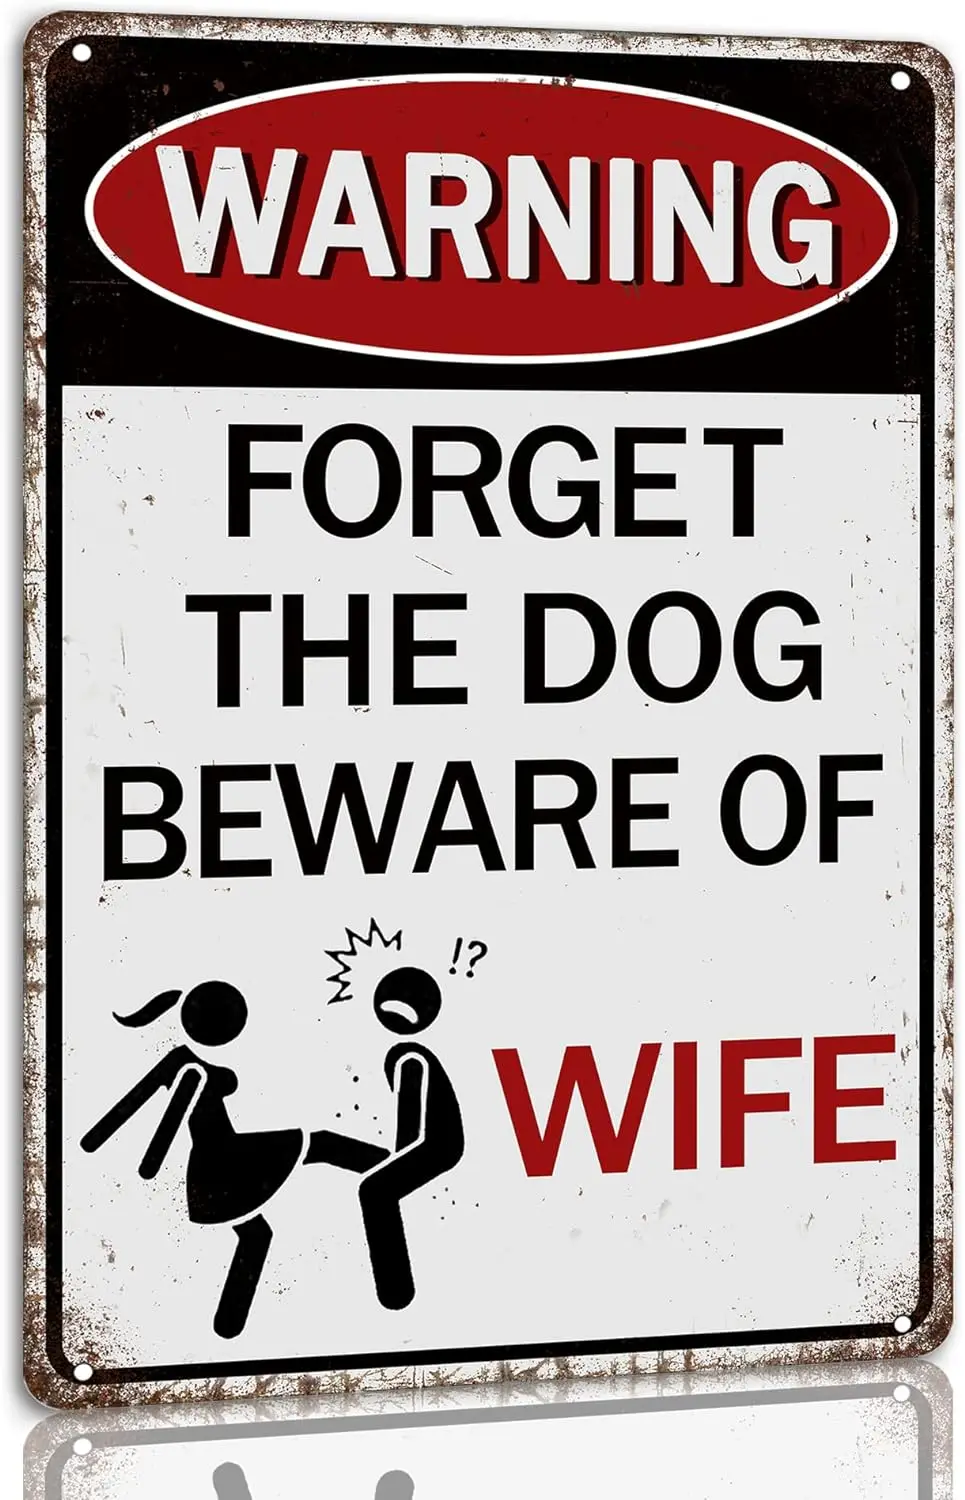 

Warning Forget the Dog Beware of Wife Metal Vintage Tin Sign Retro Wall Decoration for Cafe Bars Garage Man Cave Home